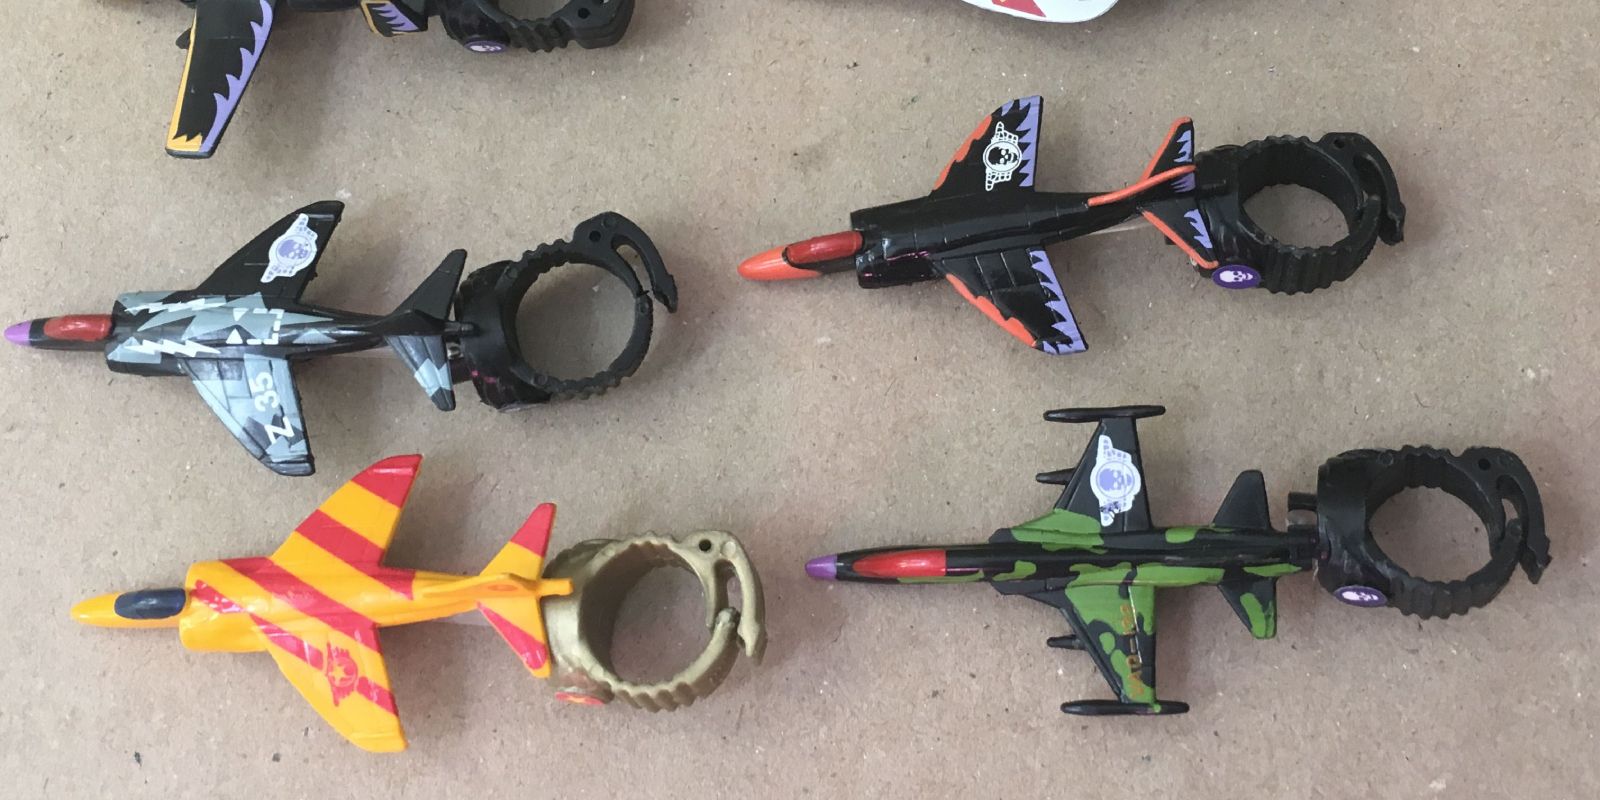 Four jets with ring attachments based on Ring Raiders